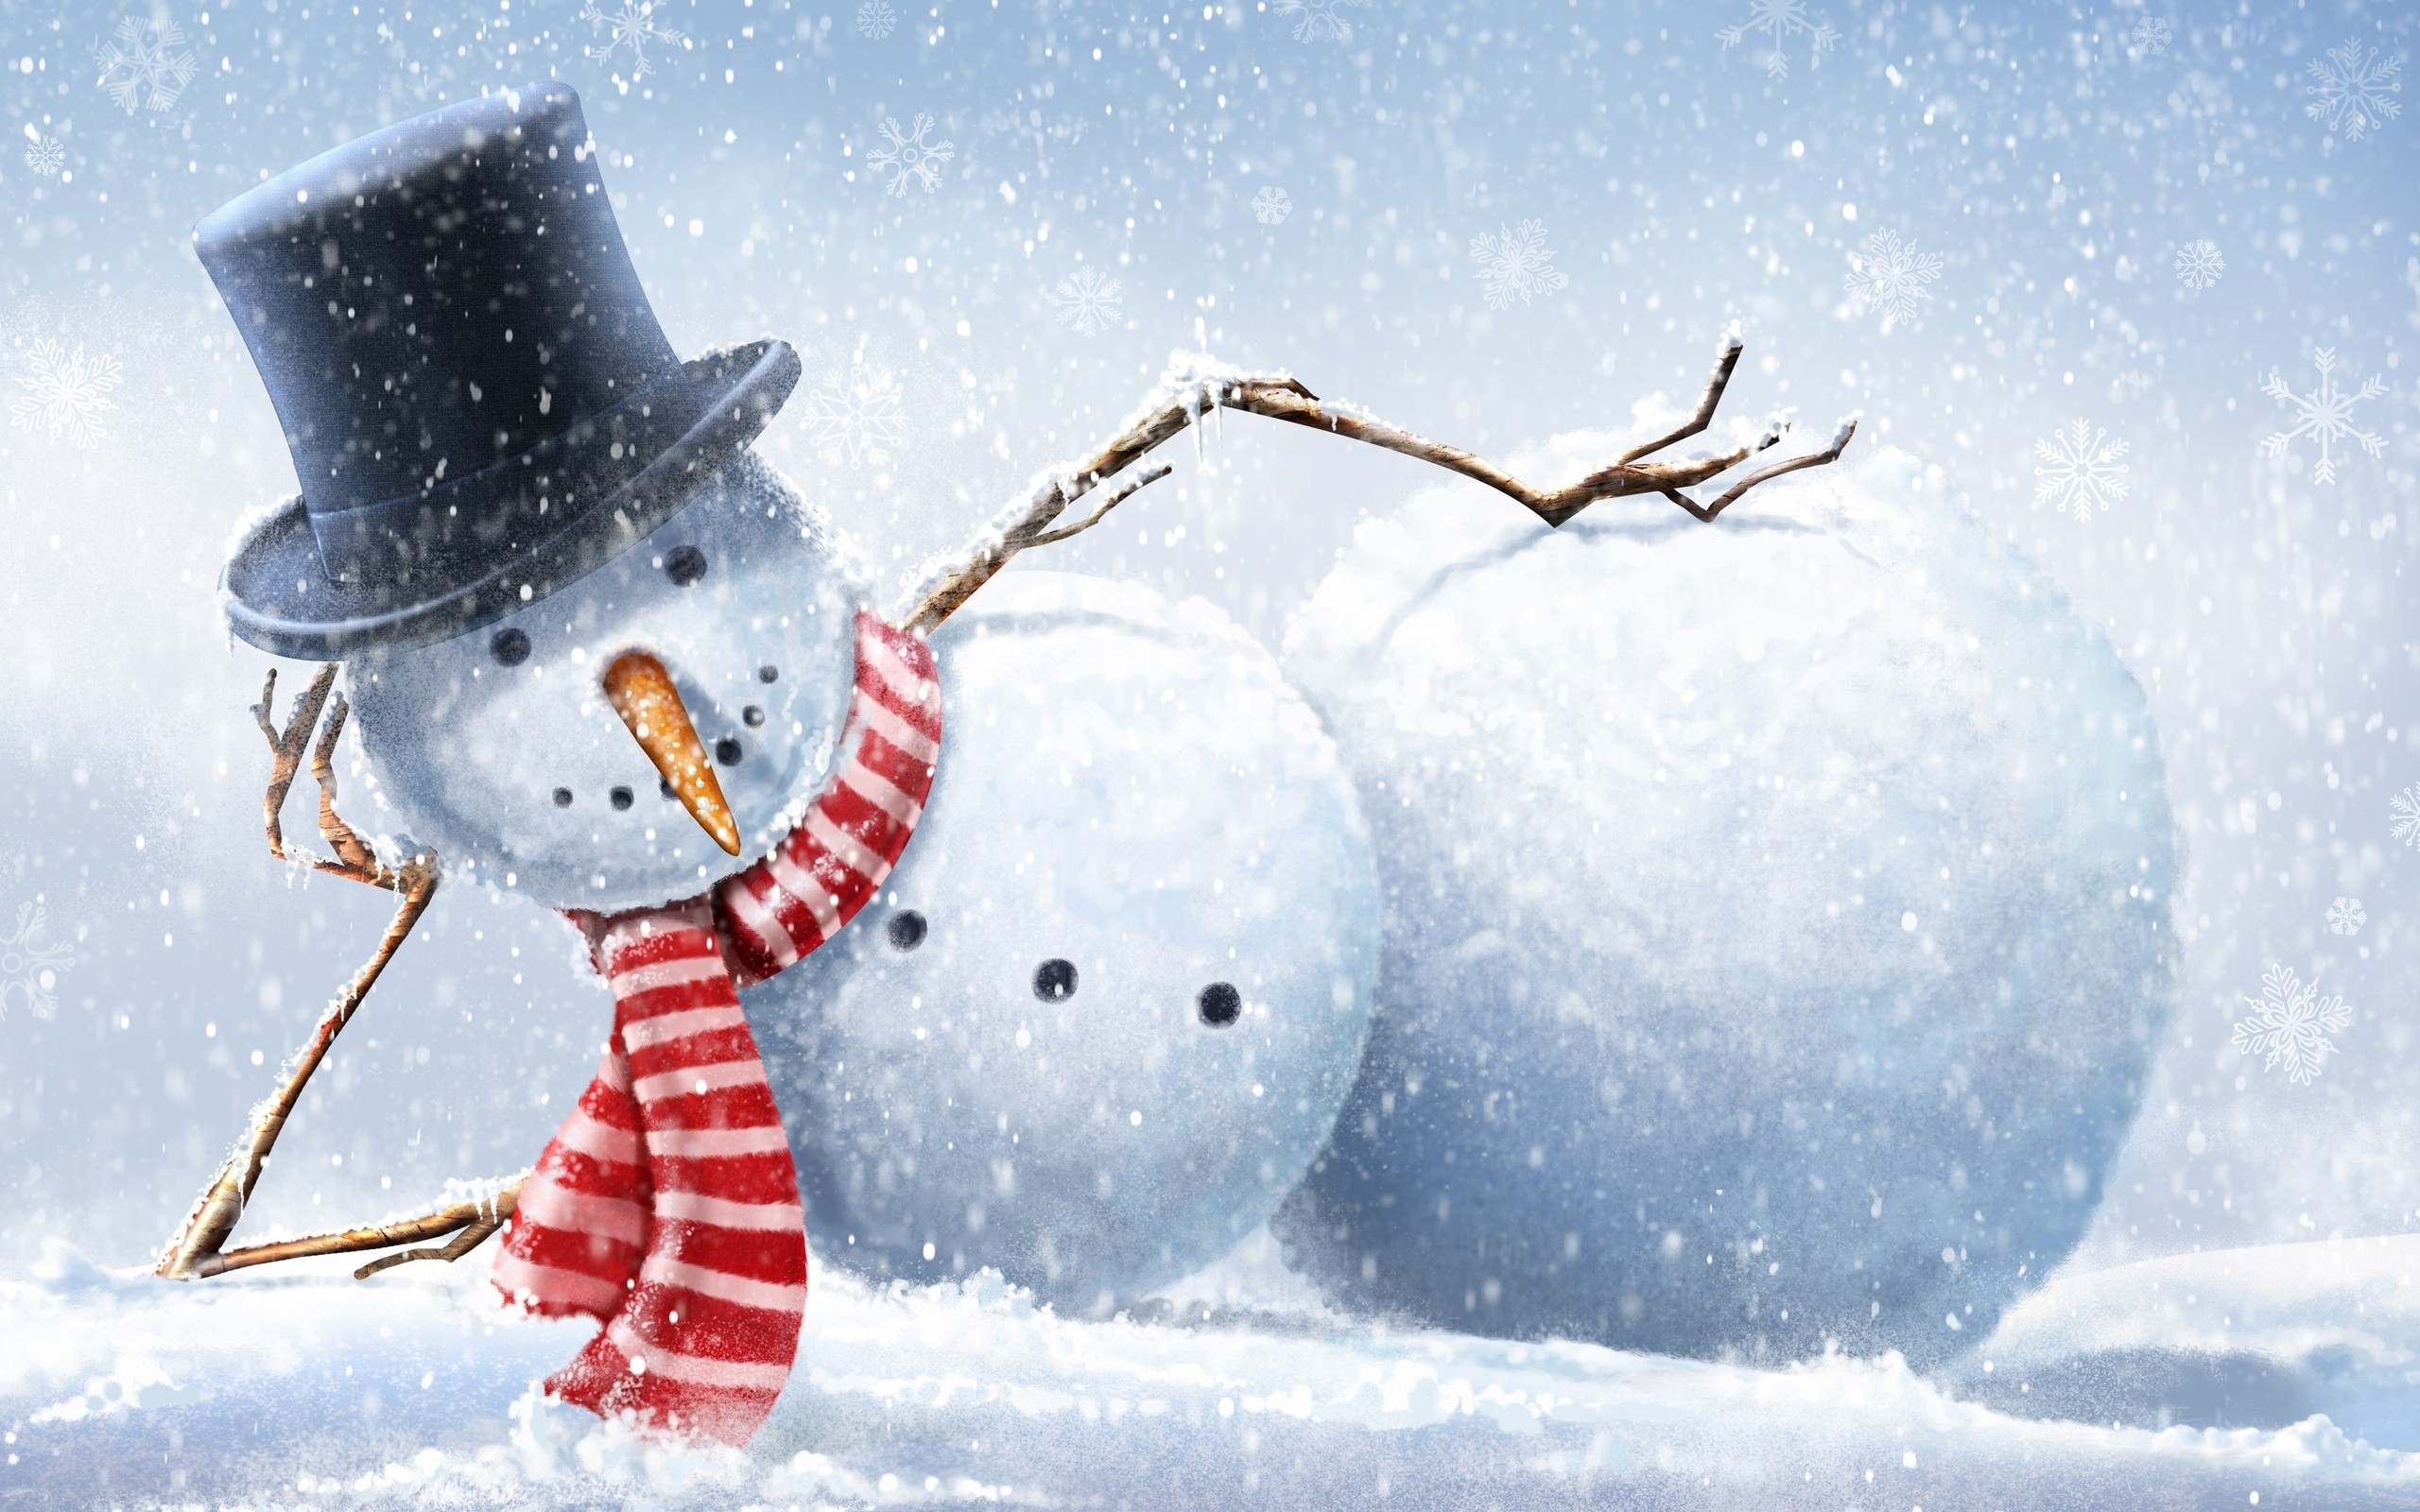 General 2560x1600 Christmas New Year snowman humor holiday